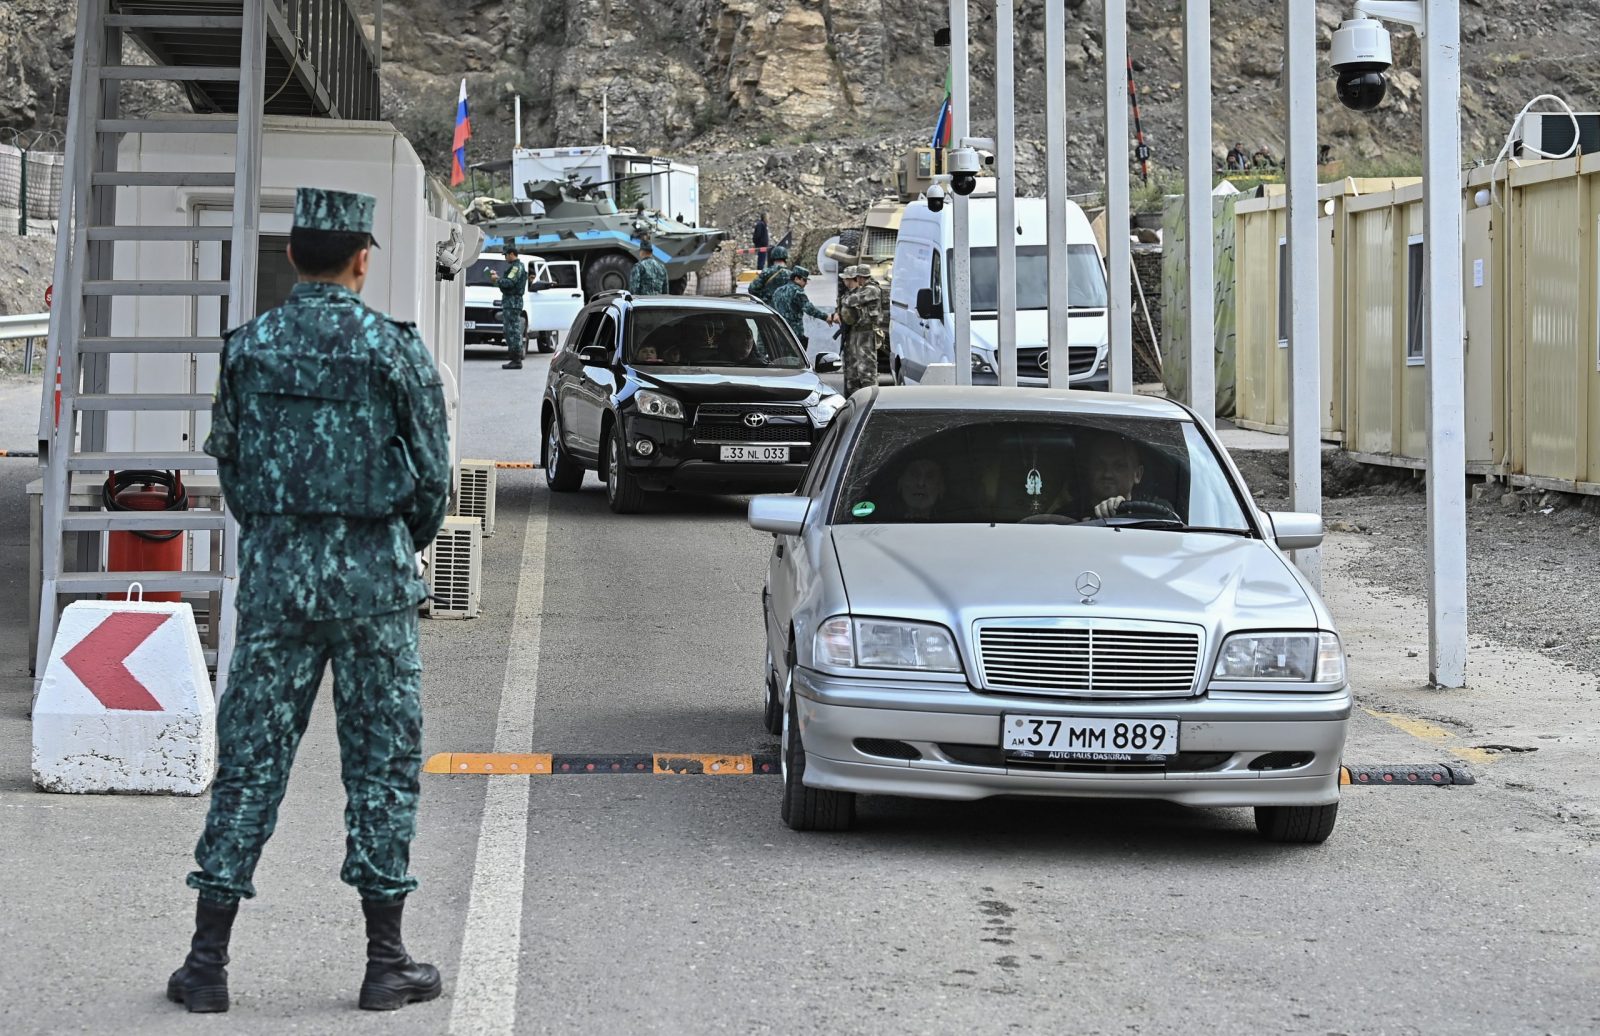 epa10882044 Azeri servicemen stand guard as ethnic Armenians leave Nagorno-Karabakh through a checkpoint on the entrance of the Lachinsky corridor, which connects the Nagorno-Karabakh region with Armenia, in Lachin, Azerbaijan, 25 September 2023. Azerbaijan on 19 September 2023 launched a brief military offensive on the contested region of Nagorno-Karabakh, a breakaway enclave that is home to some 120,000 ethnic Armenians. The Armenian government announced the evacuation of about 3,000 local residents from the region following the ceasefire agreed on 20 September 2023, as Azerbaijan opened all checkpoints with Armenia for the unimpeded exit of civilians from the territory of Nagorno-Karabakh. Russian peacekeepers escorted convoys of civilians from Nagorno-Karabakh leaving for Armenia, the Russian Ministry of Defense reported.  EPA/ROMAN ISMAYILOV